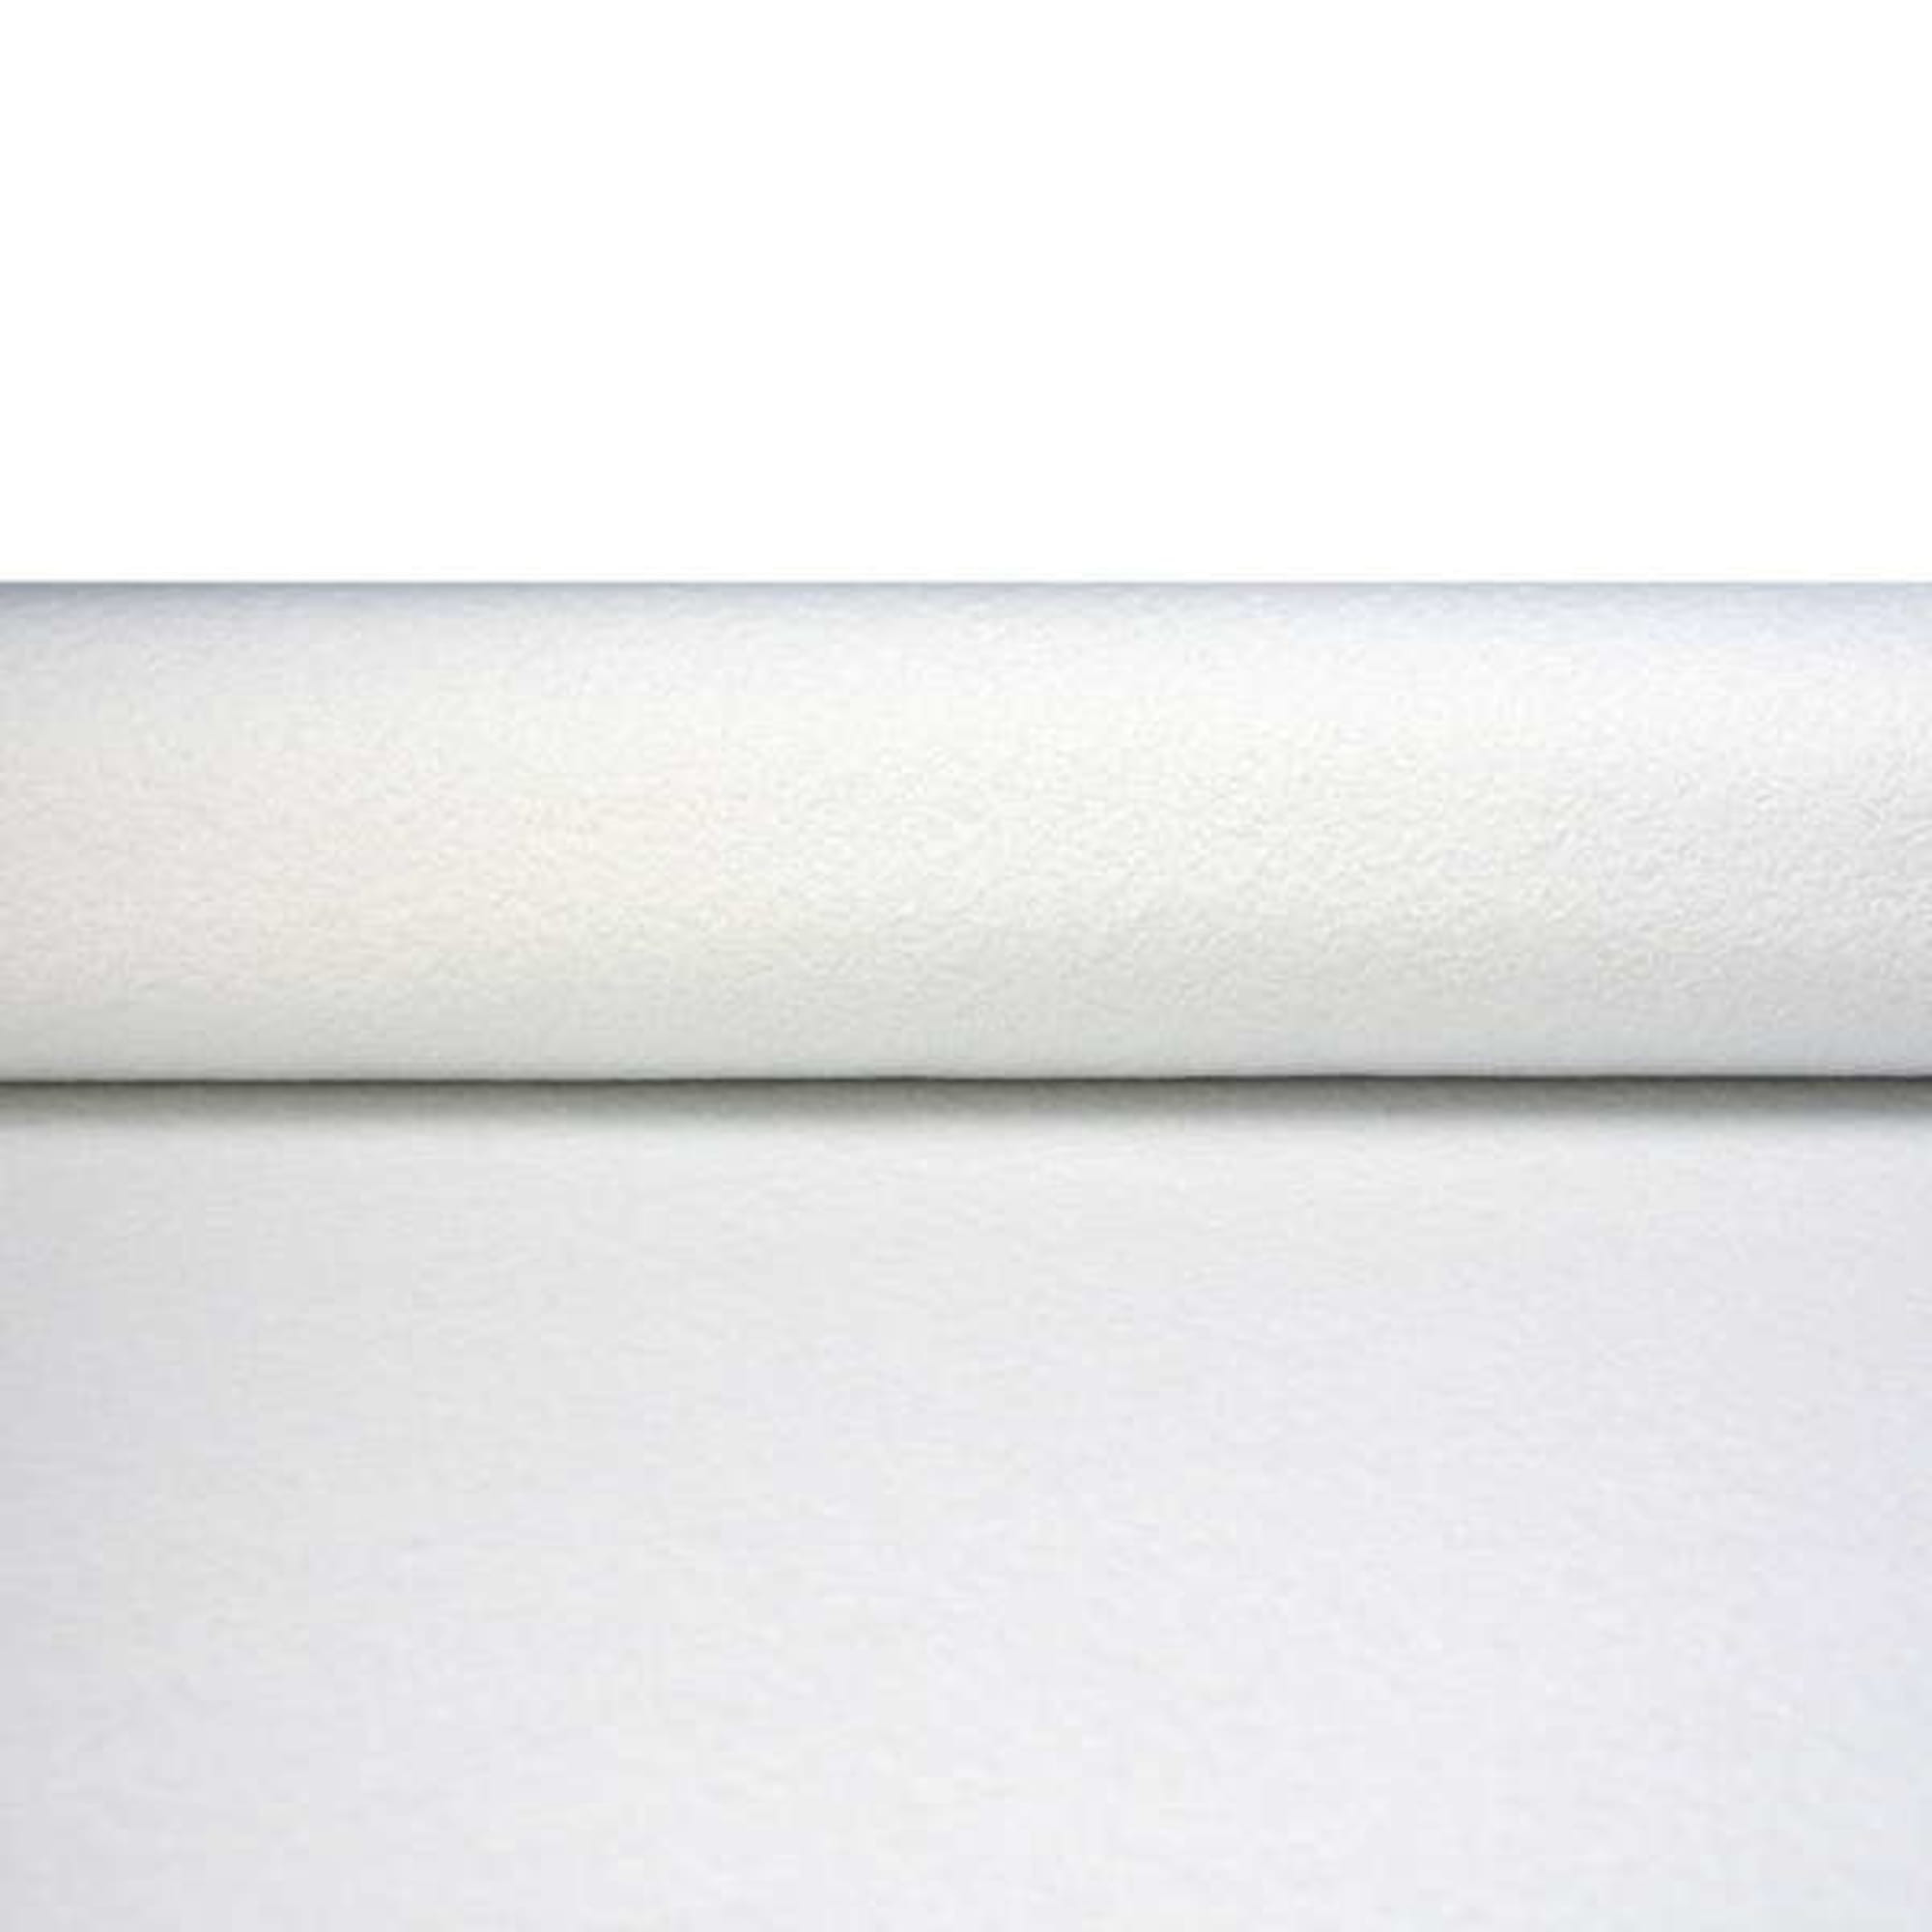 Breatex™ Non-woven absorber 300 g/m² , image 3